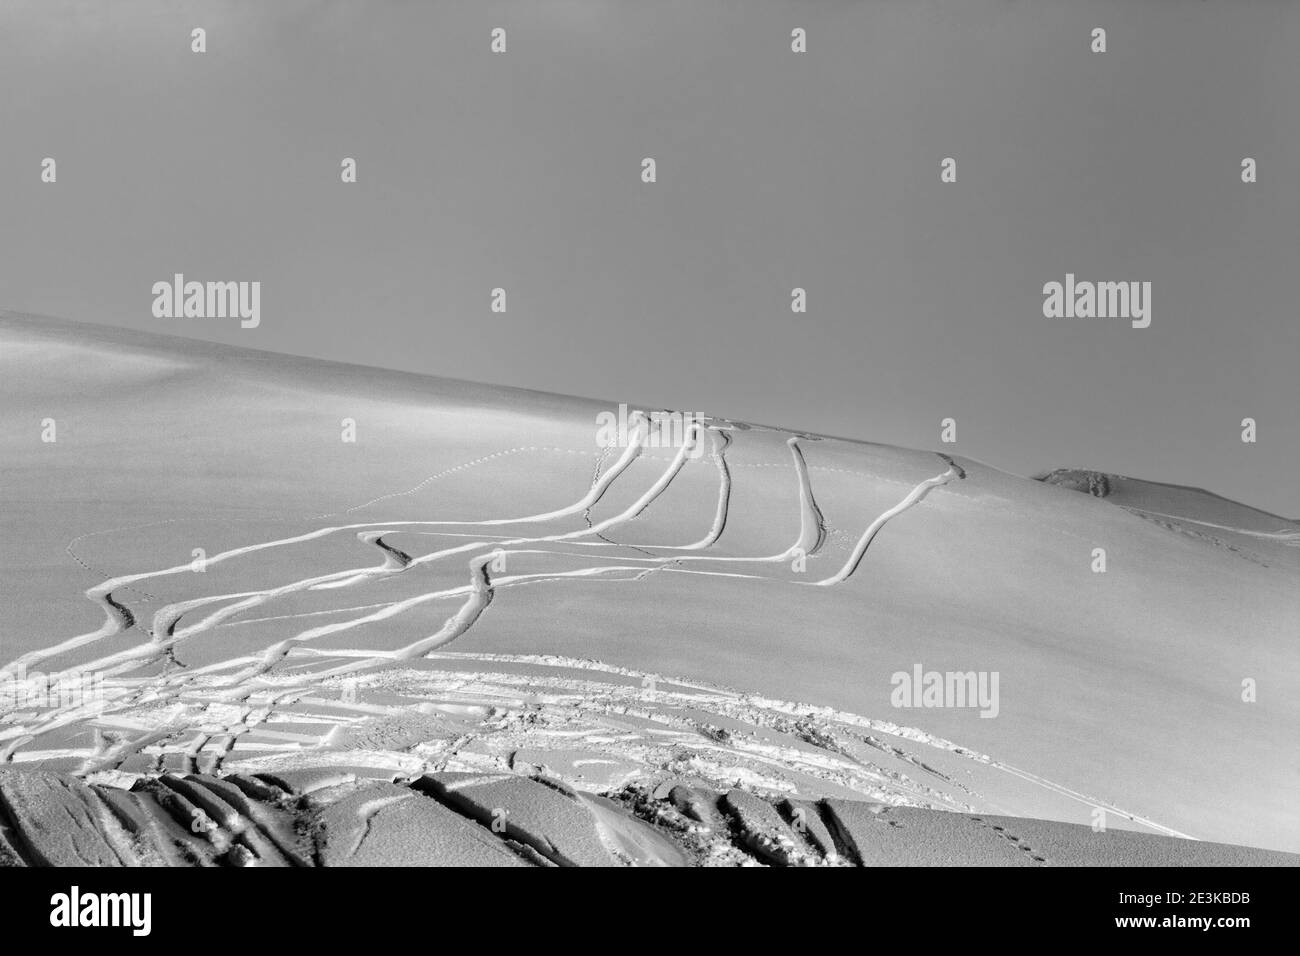 Snowy off-piste ski slope with trace from skis and snowboards at winter night. Black and white toned landscape. Stock Photo